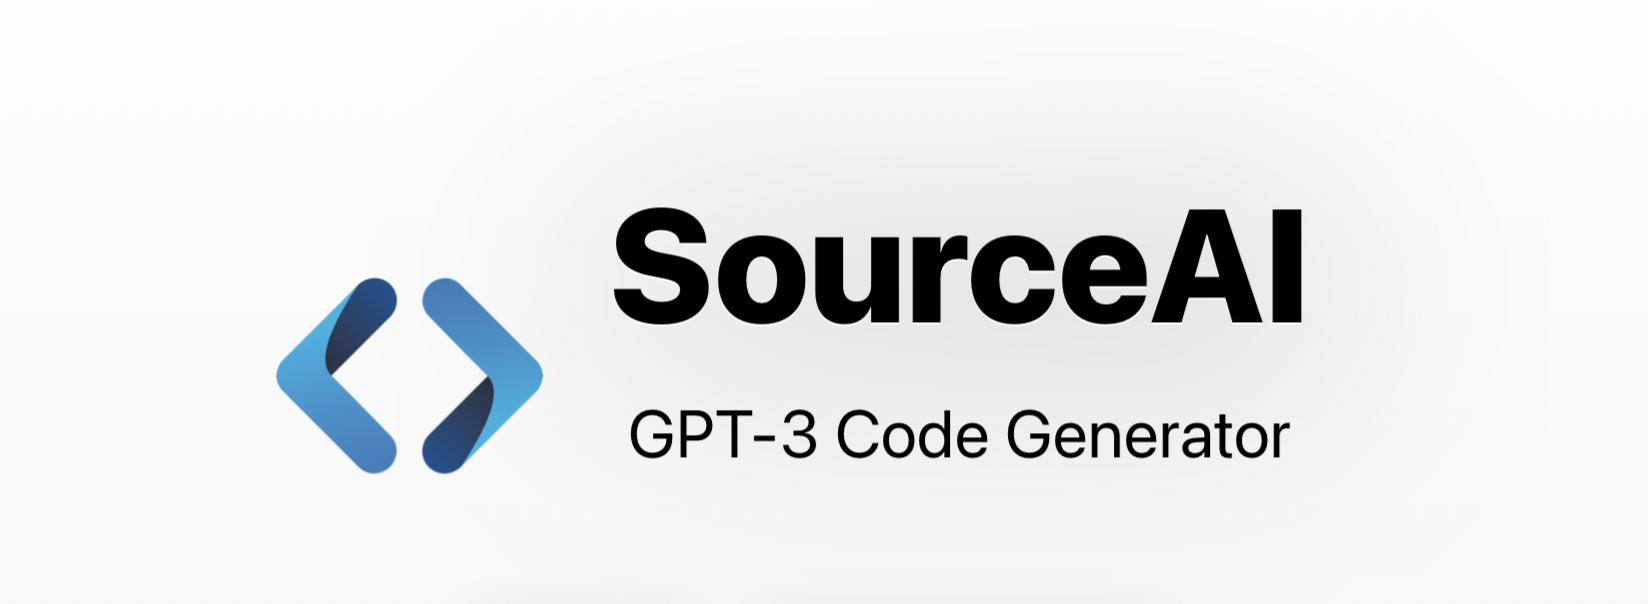 SourceAI - Generate code in any programming language with just one click